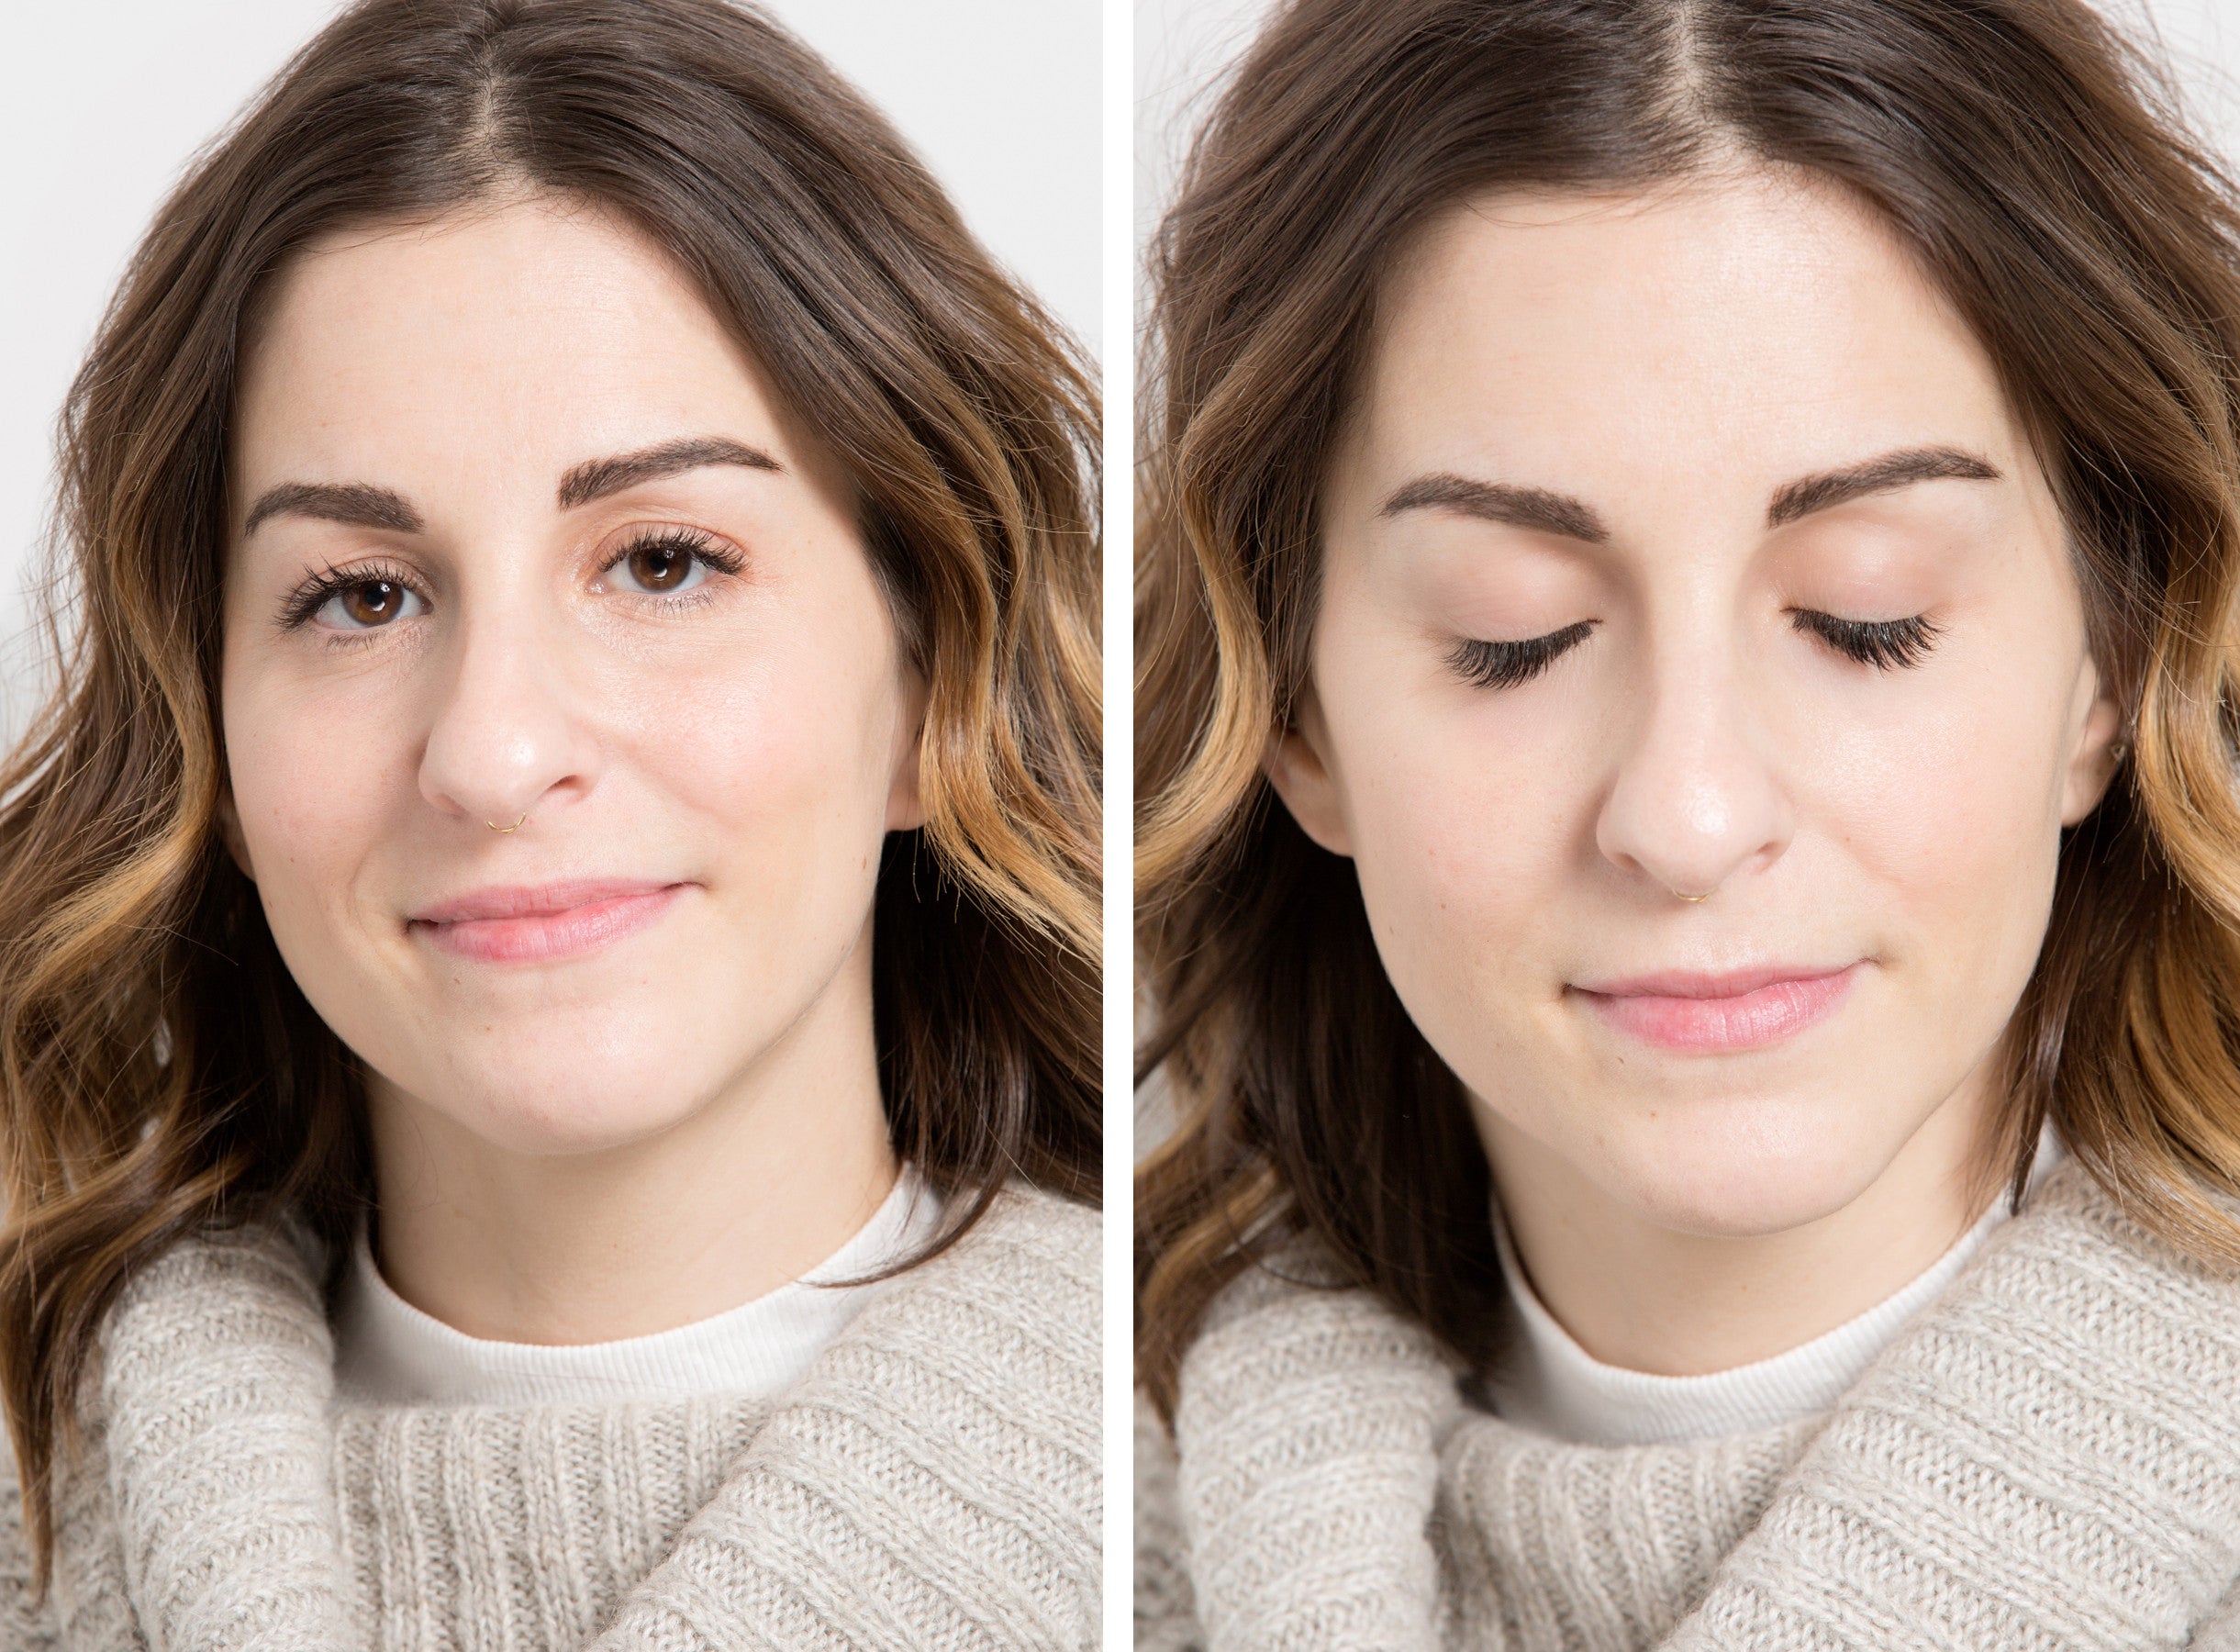 A First-Timer’s Guide To Getting Eyelash Extensions